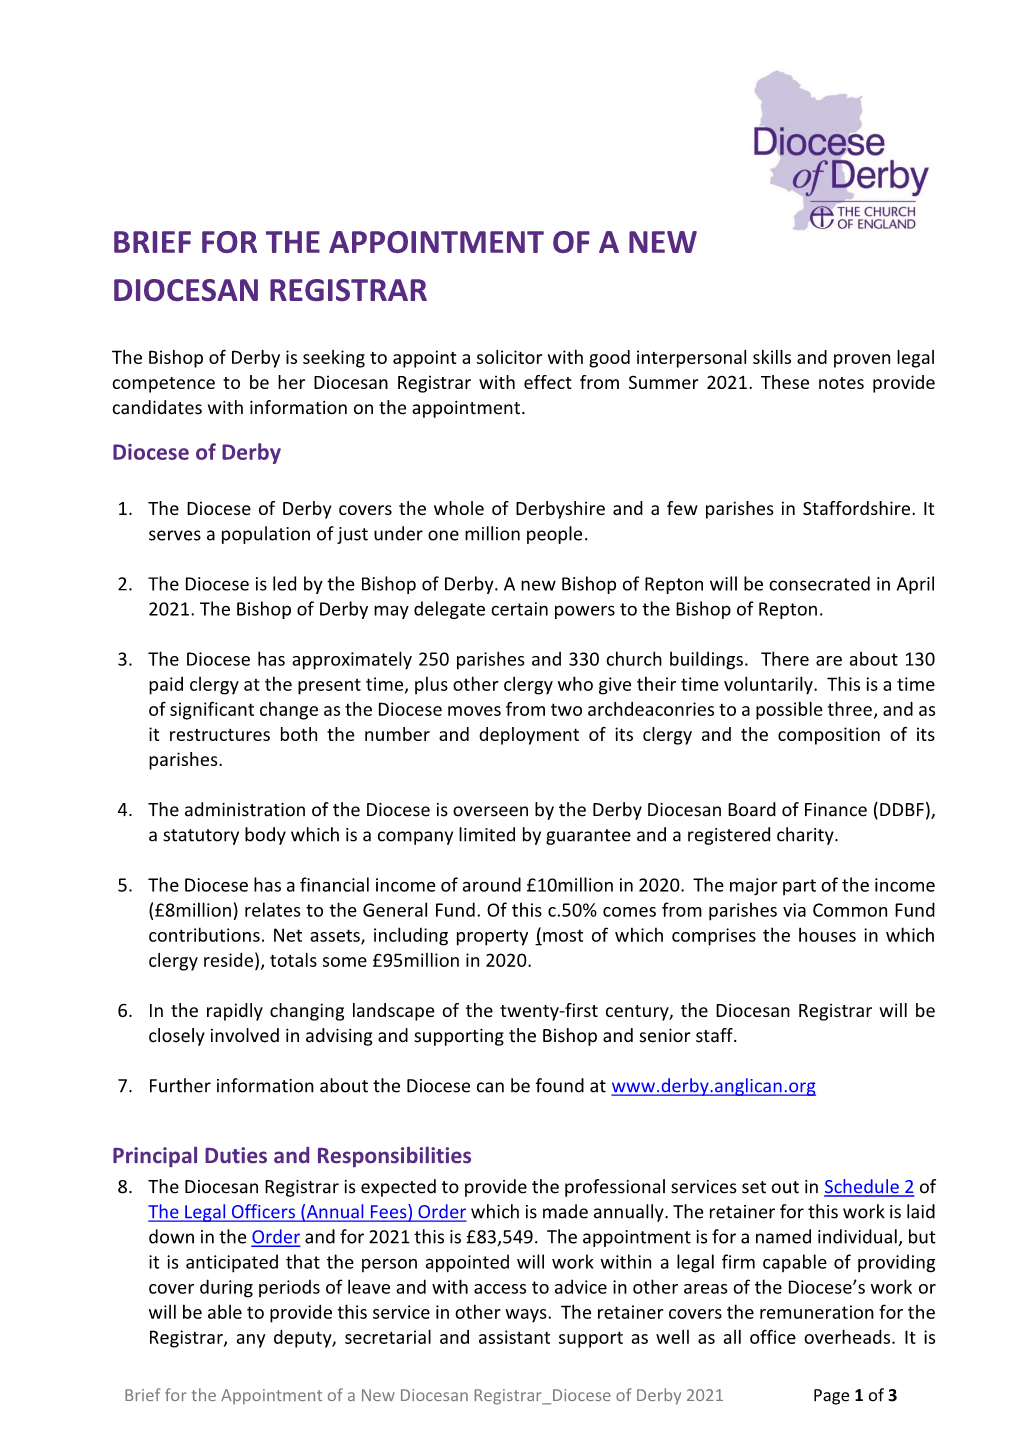 Brief for the Appointment of a New Diocesan Registrar